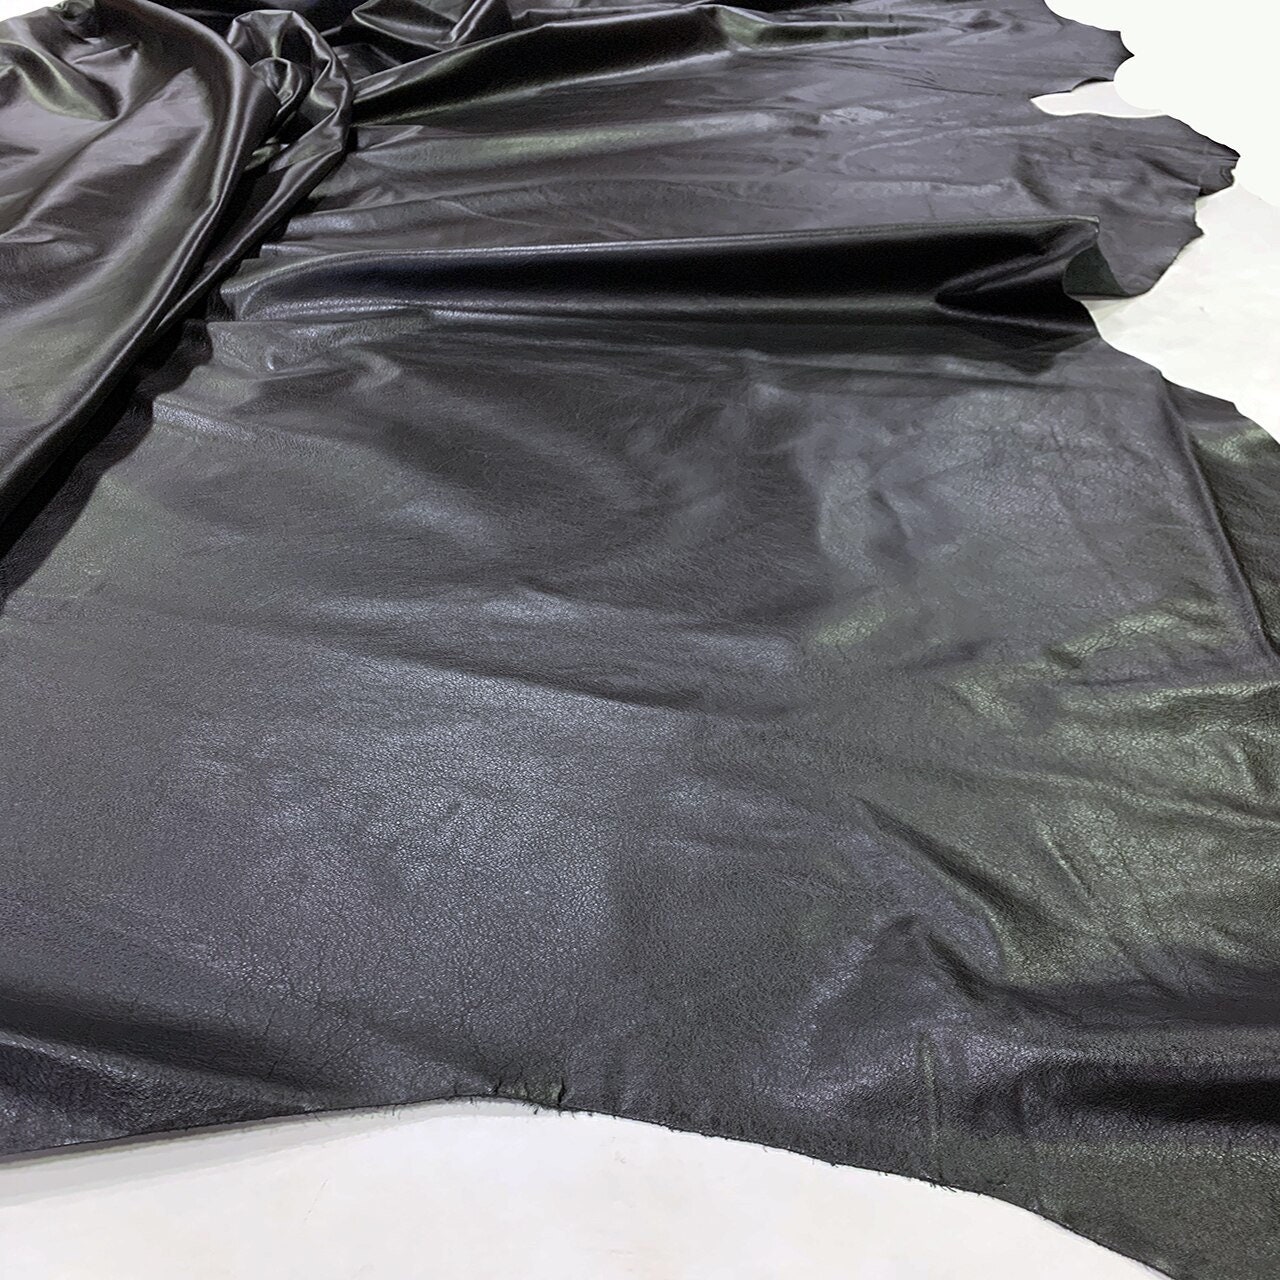 Black Thin Calf Leather Hide, Upholstery leather, Leather for clothing and  furniture coverings, Genuine Italian Cowhides, Durable leather